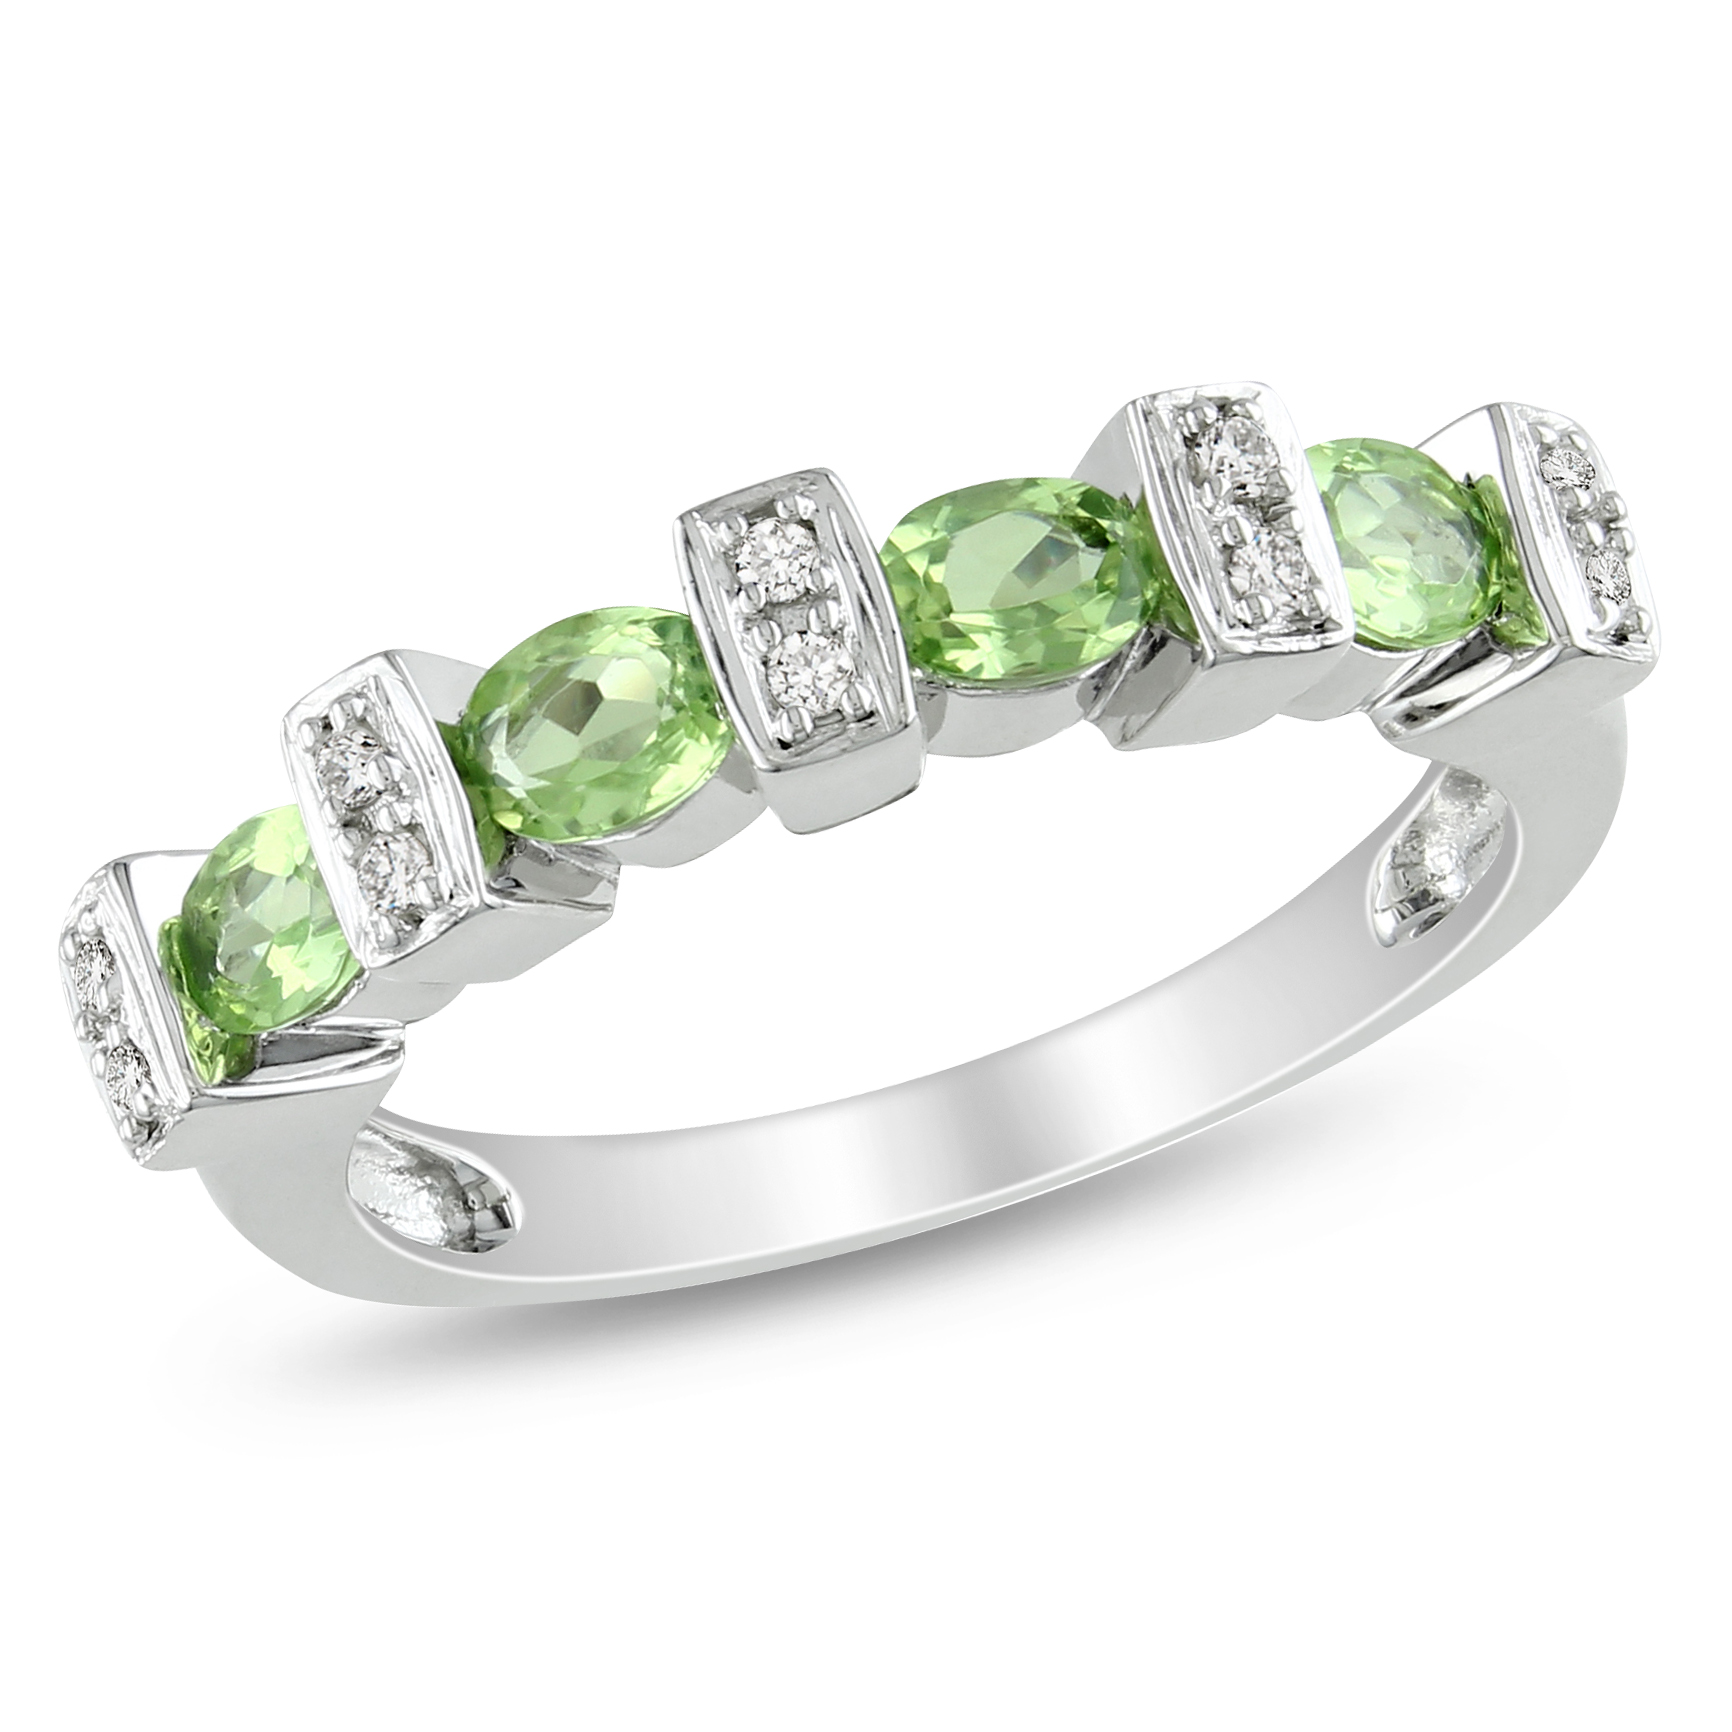 Amour 0.05 Carat T.W. Diamond and 3/4 Carat T.G.W. Peridot Fashion Ring in Sterling Silver GH I3